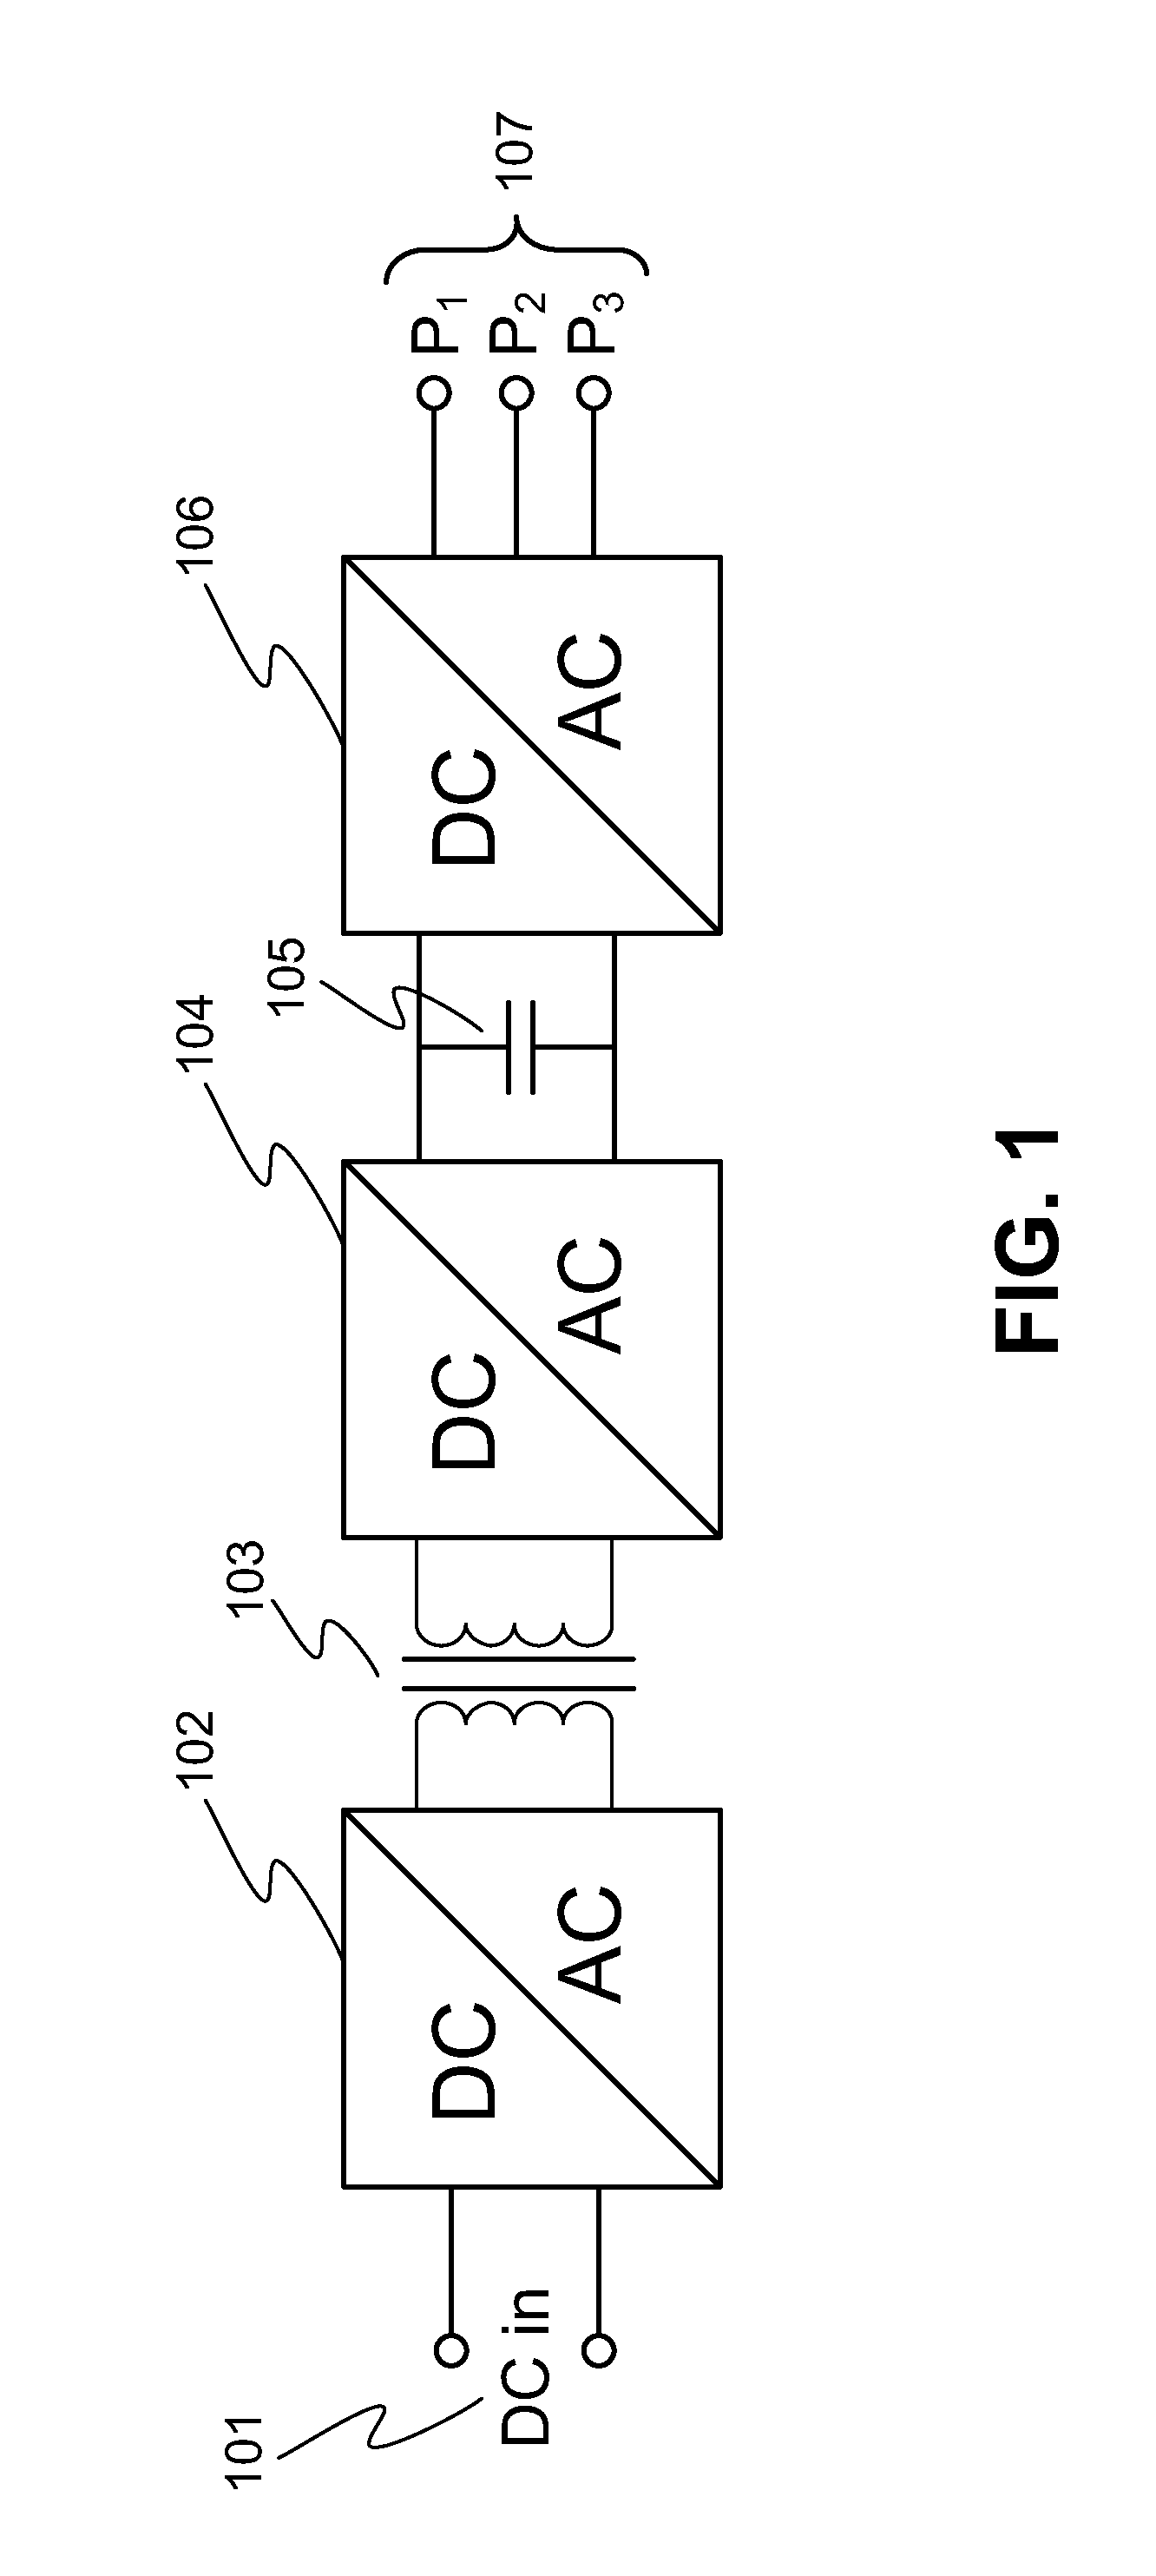 System and Method for Exchangeable Capacitor Modules for High Power Inverters and Converters